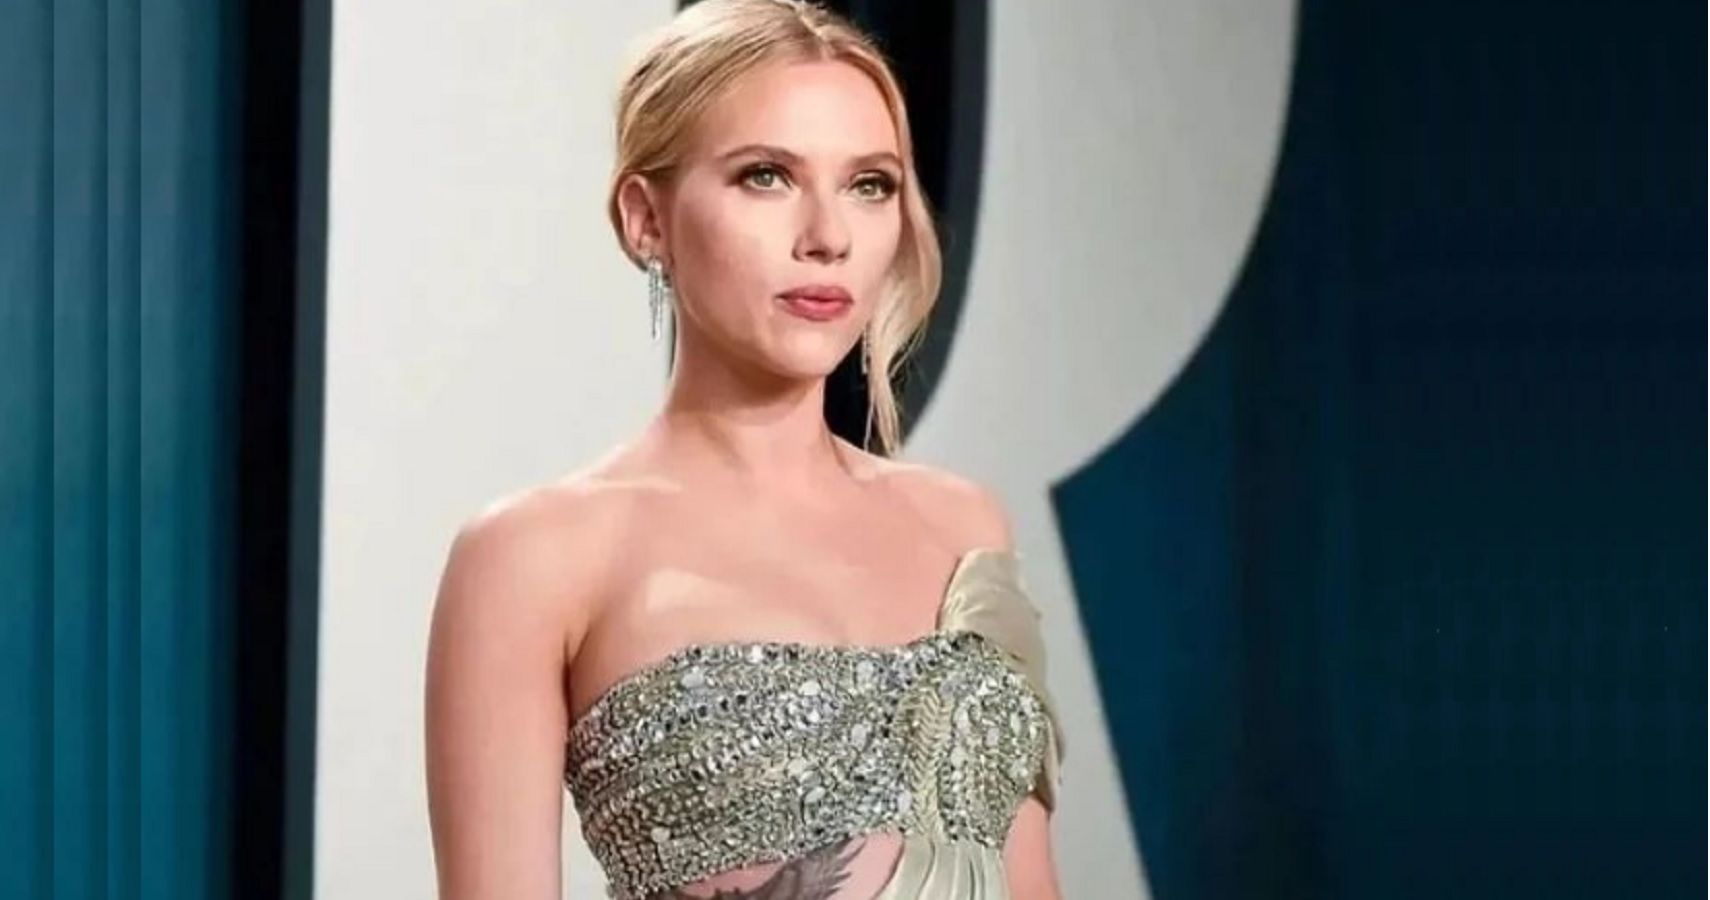 Why is Scarlett Johansson's net worth so high? All sources of income 